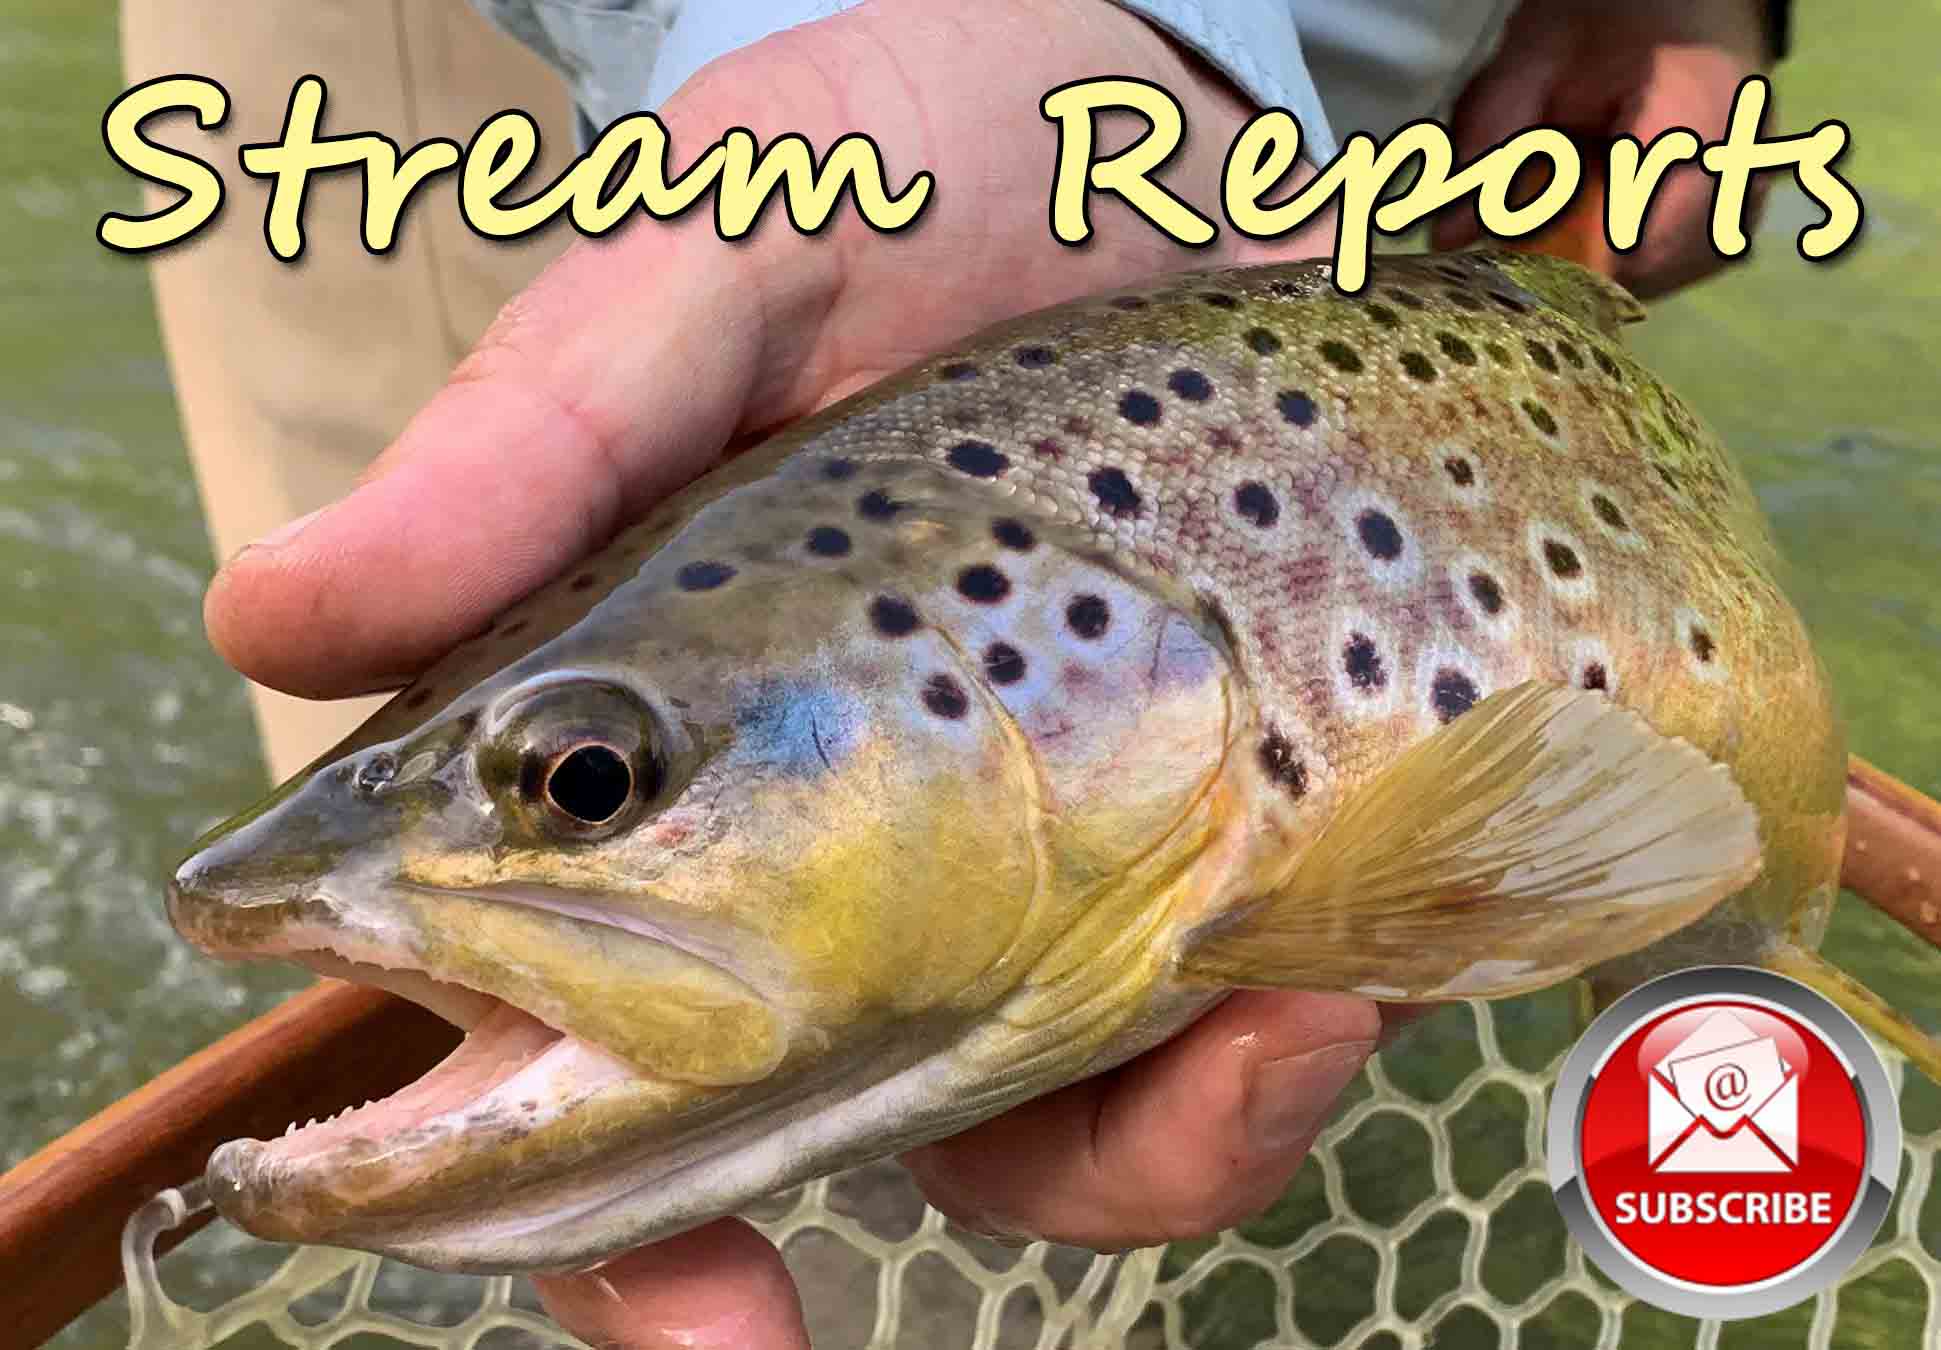 Get Local Stream And Fishing Reports For Central PA, Eastern PA, Lehigh And Susquehanna River. Sign Up To Receive Our Newsletter. 